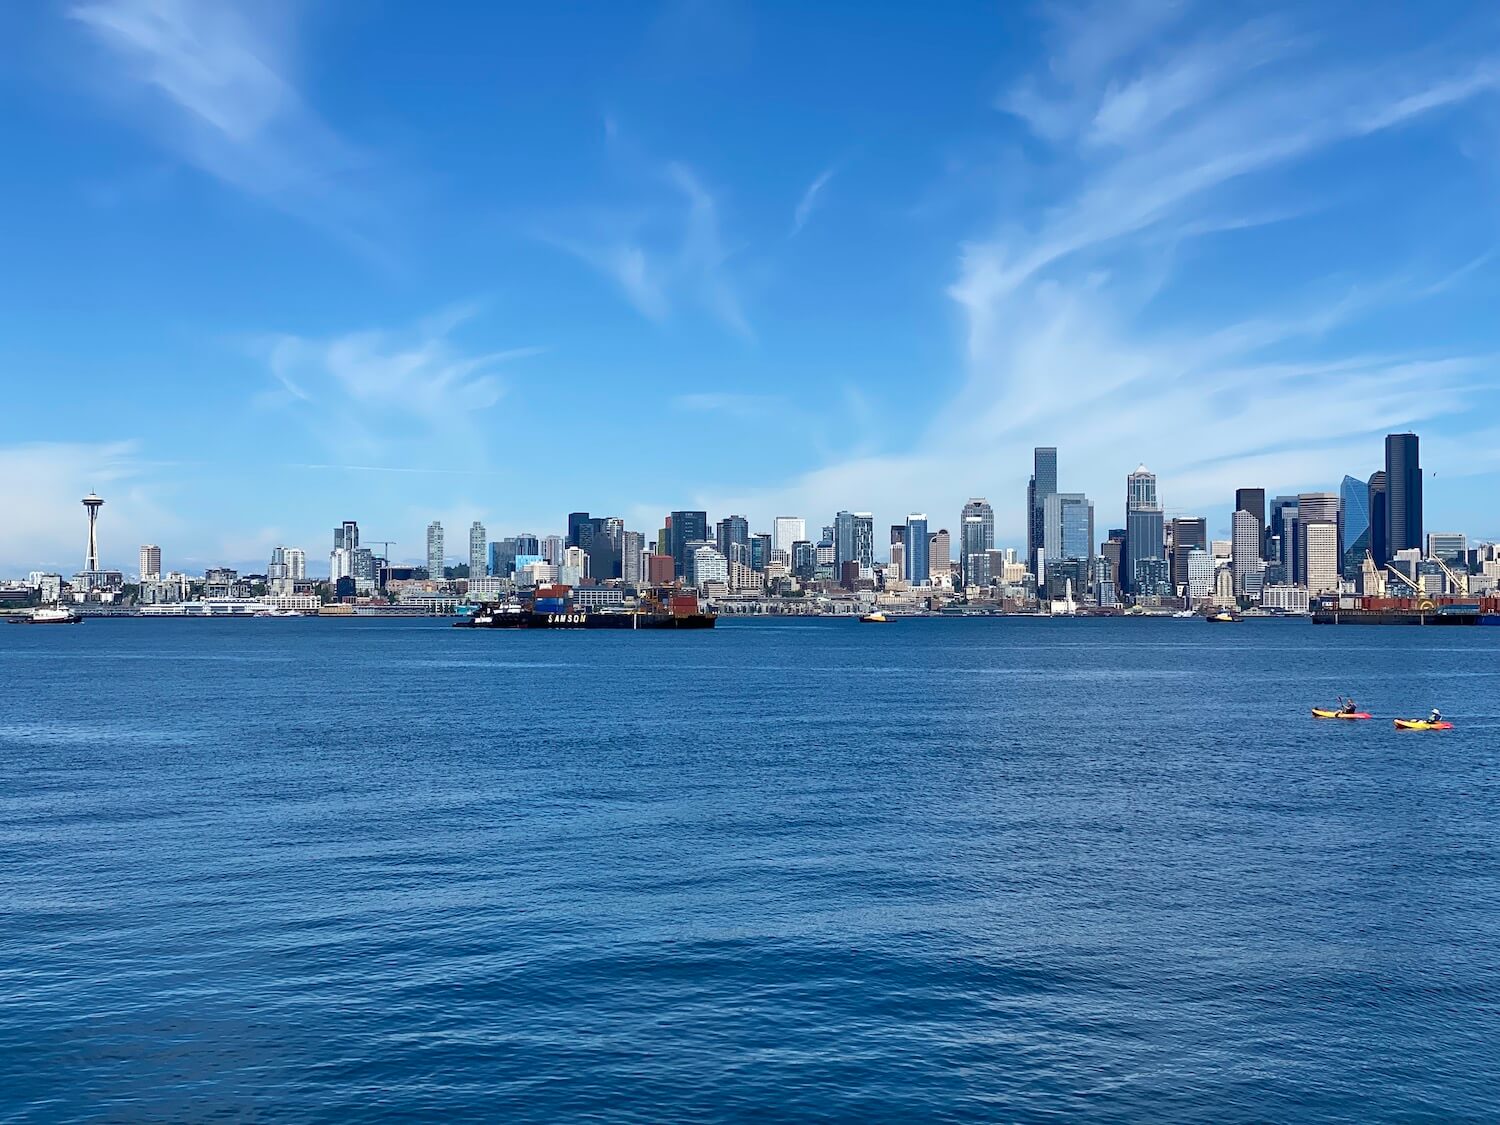 This panoramic view of the skyline of Seattle includes the Space Needle and the Columbia Center amongst other prominent buildings. The lush blue water of the Salish Sea is rolling with gentle waves while two kayakers in bright colored boats navigate the gentle waters.